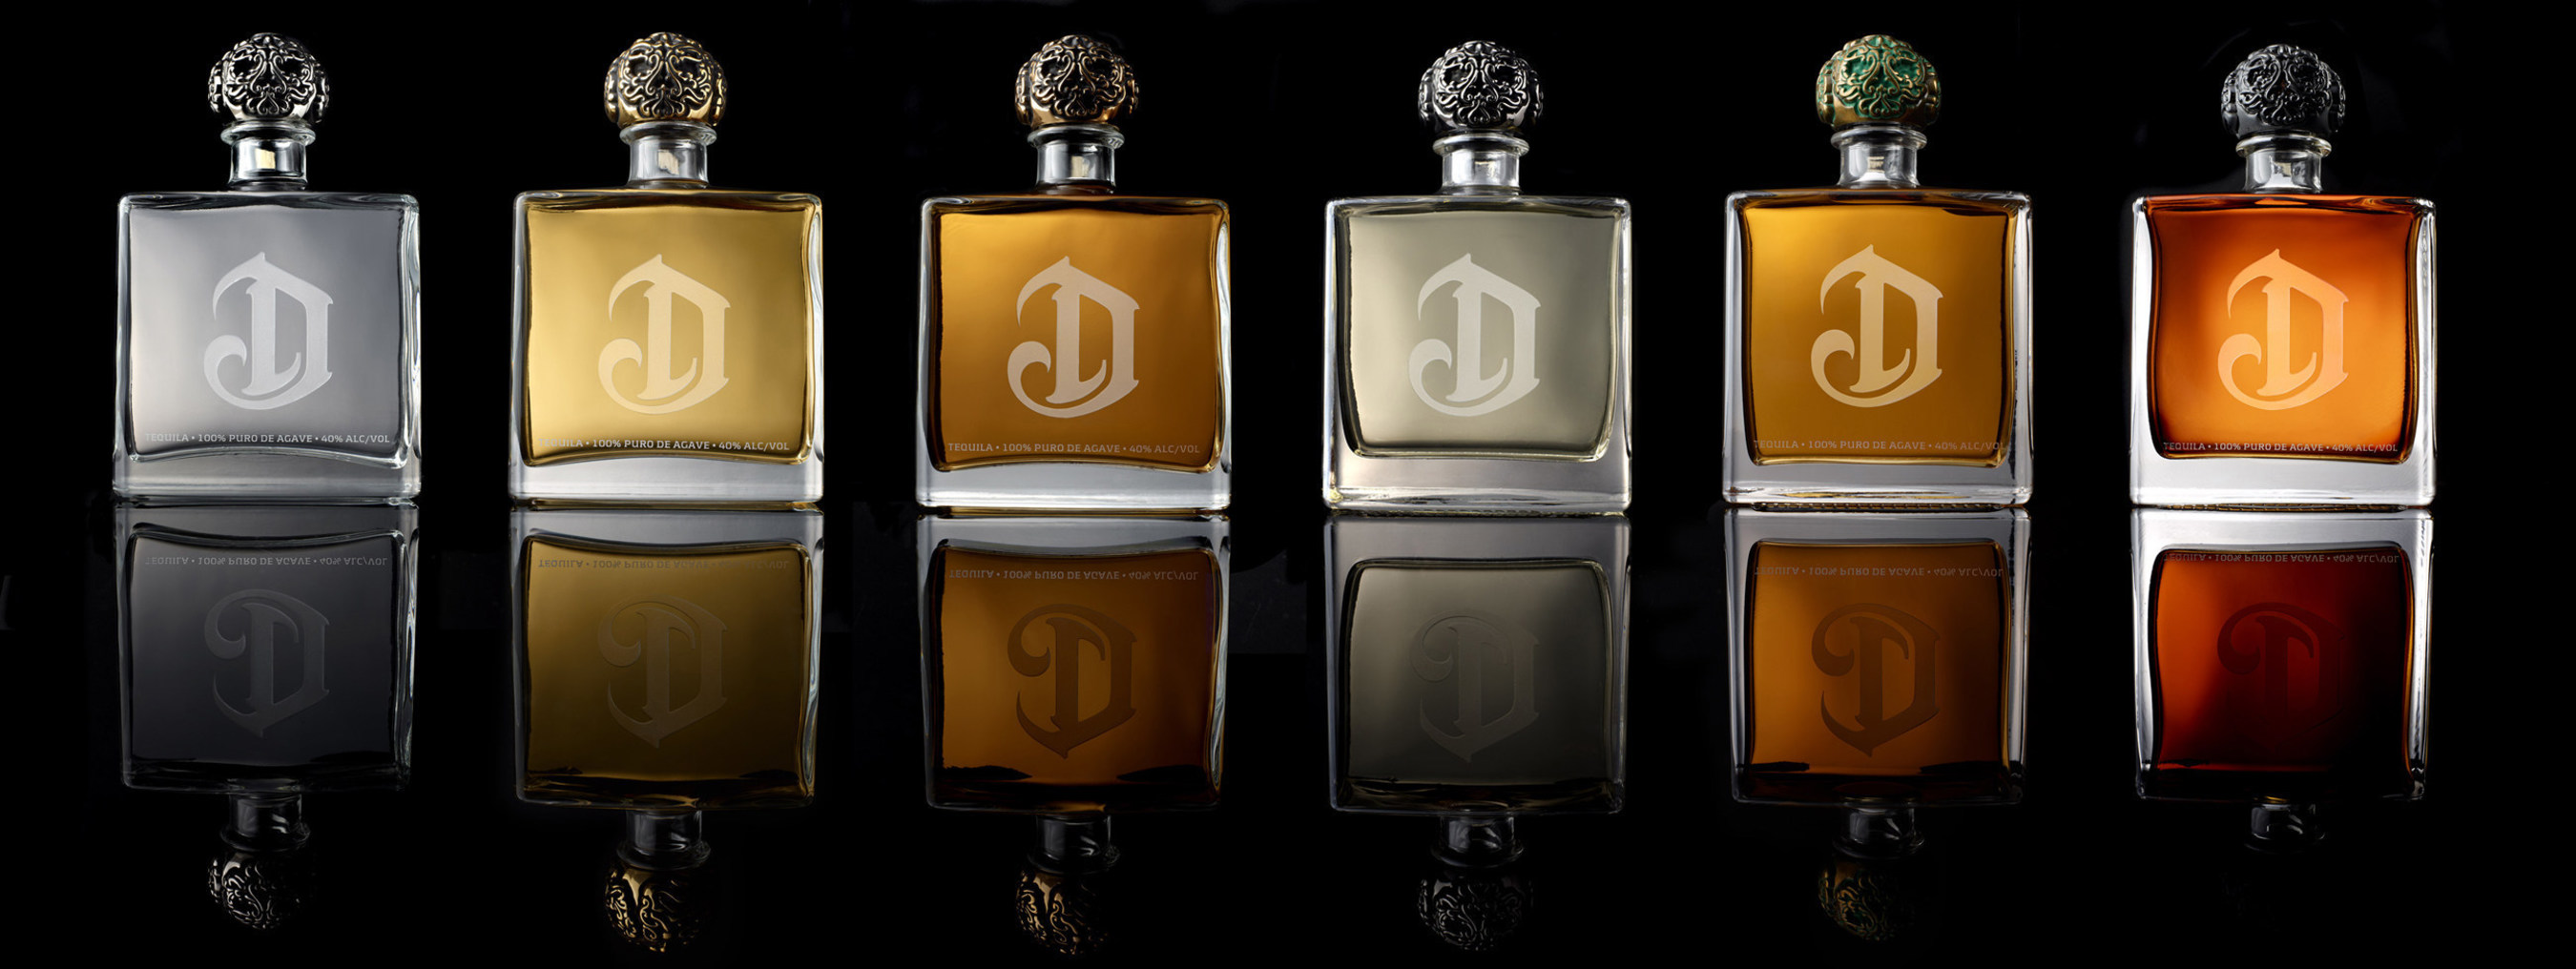 The new DELEON(R) Tequila portfolio boasts six provocative ultra-premium and luxury expressions made from the finest, hand-selected 100% Blue Weber agave sourced from the highlands of Jalisco, Mexico.